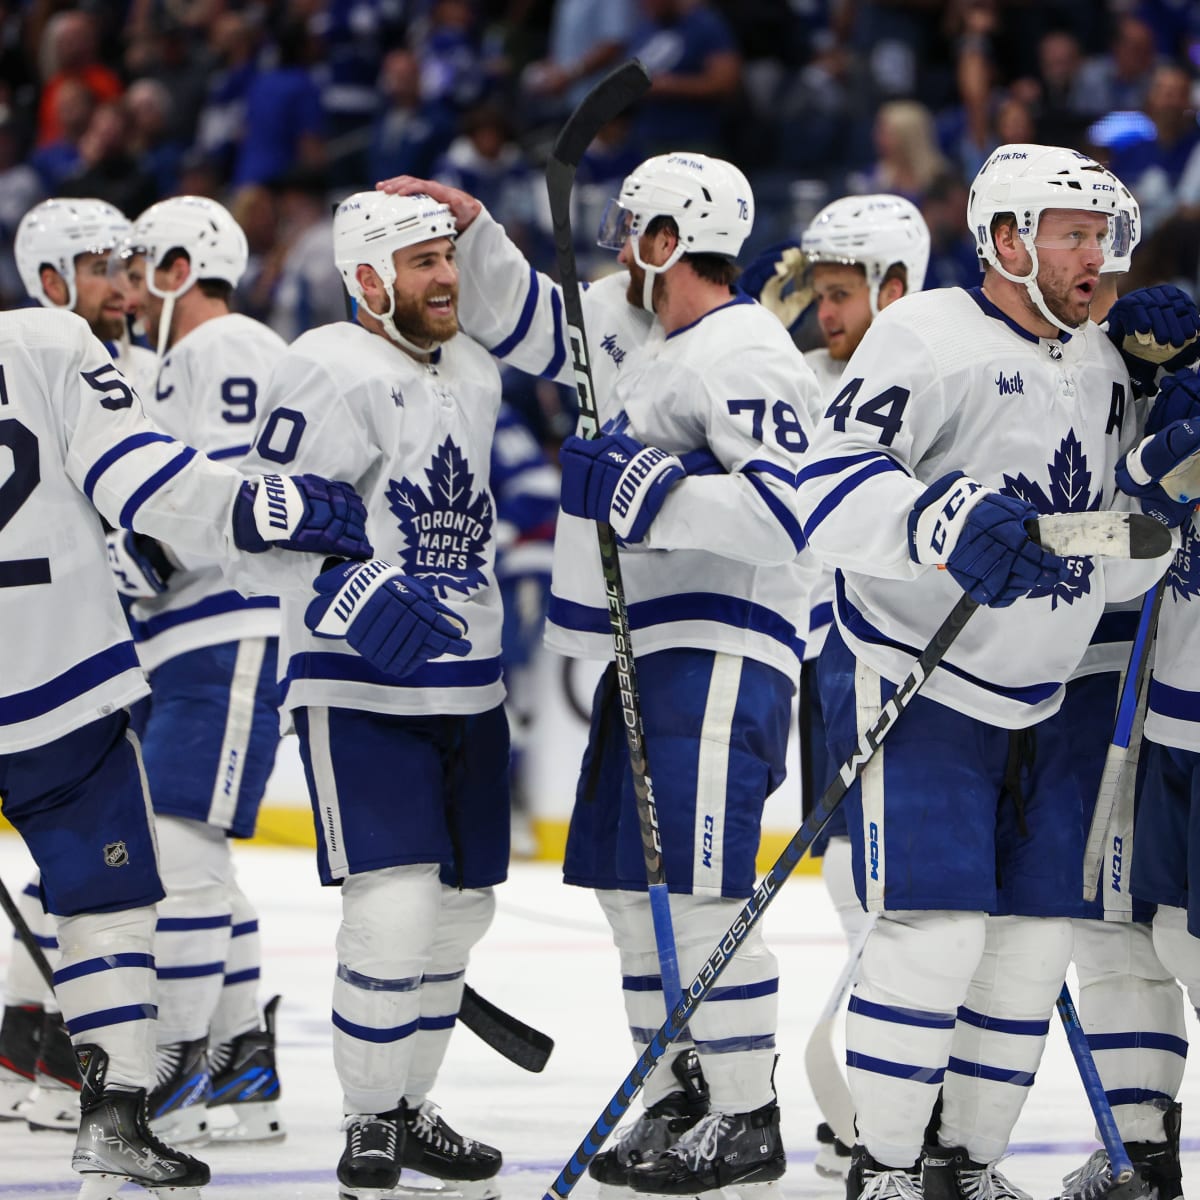 The best spots to watch Toronto Maple Leafs playoff games in 2023